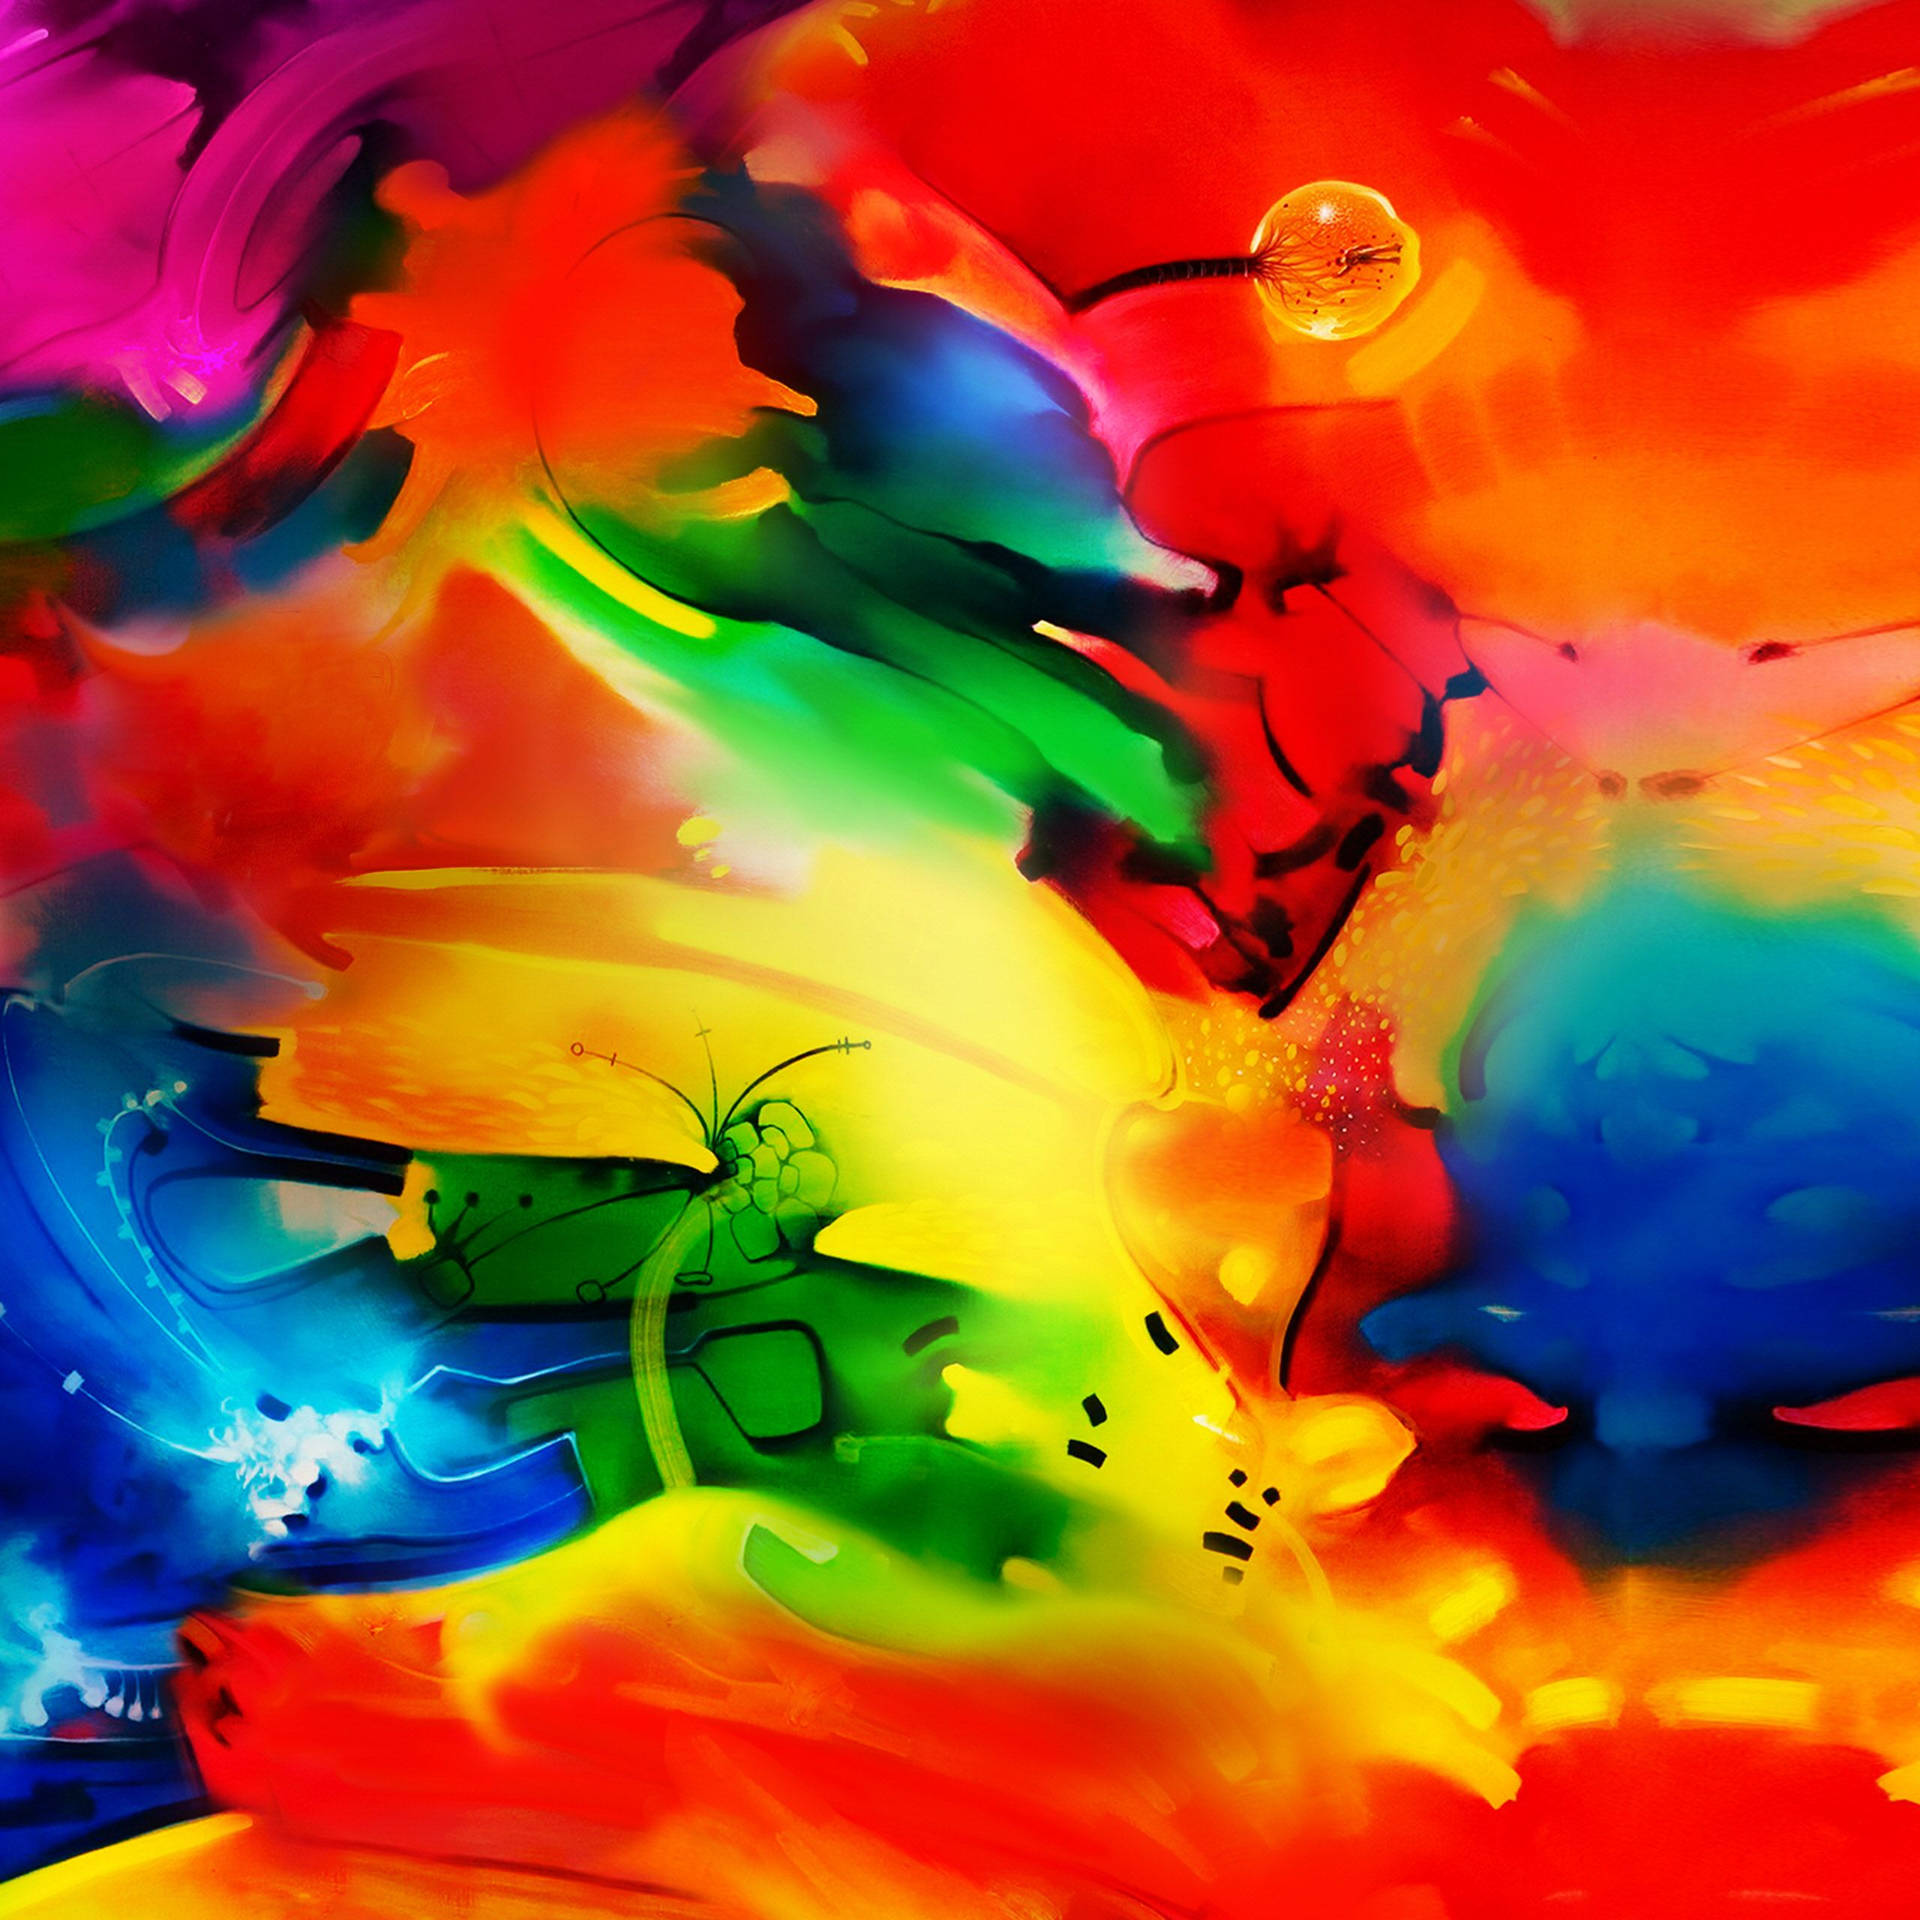 Colourful Abstract Painting Samsung Galaxy Tablet Wallpaper